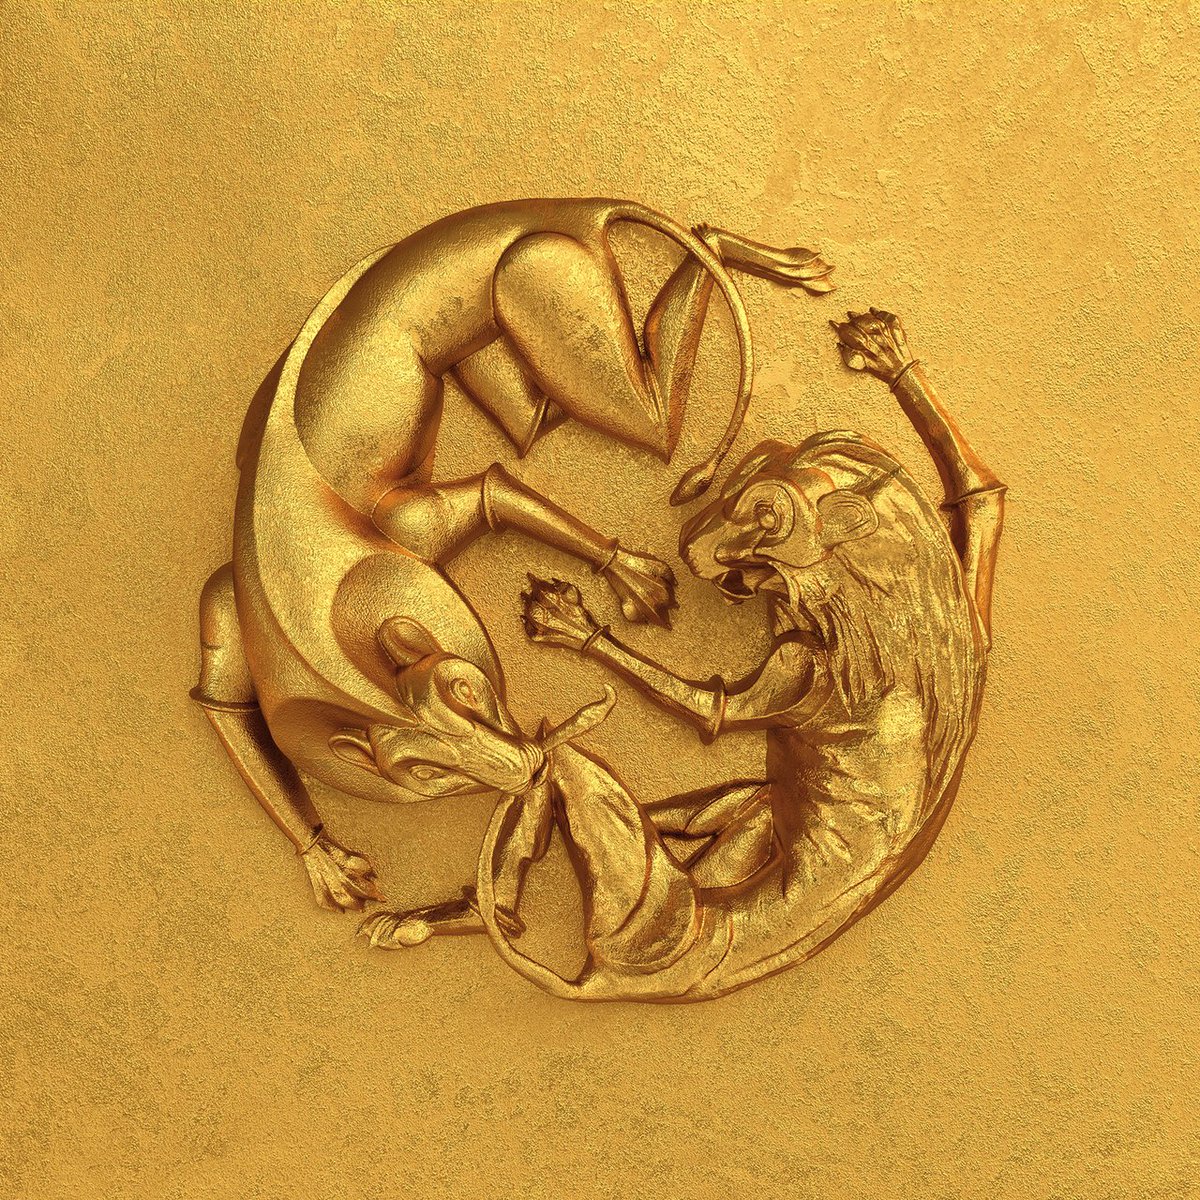 Listen to The Lion King: The Gift [Deluxe Edition] by Beyoncé tidal.com/album/15037940…